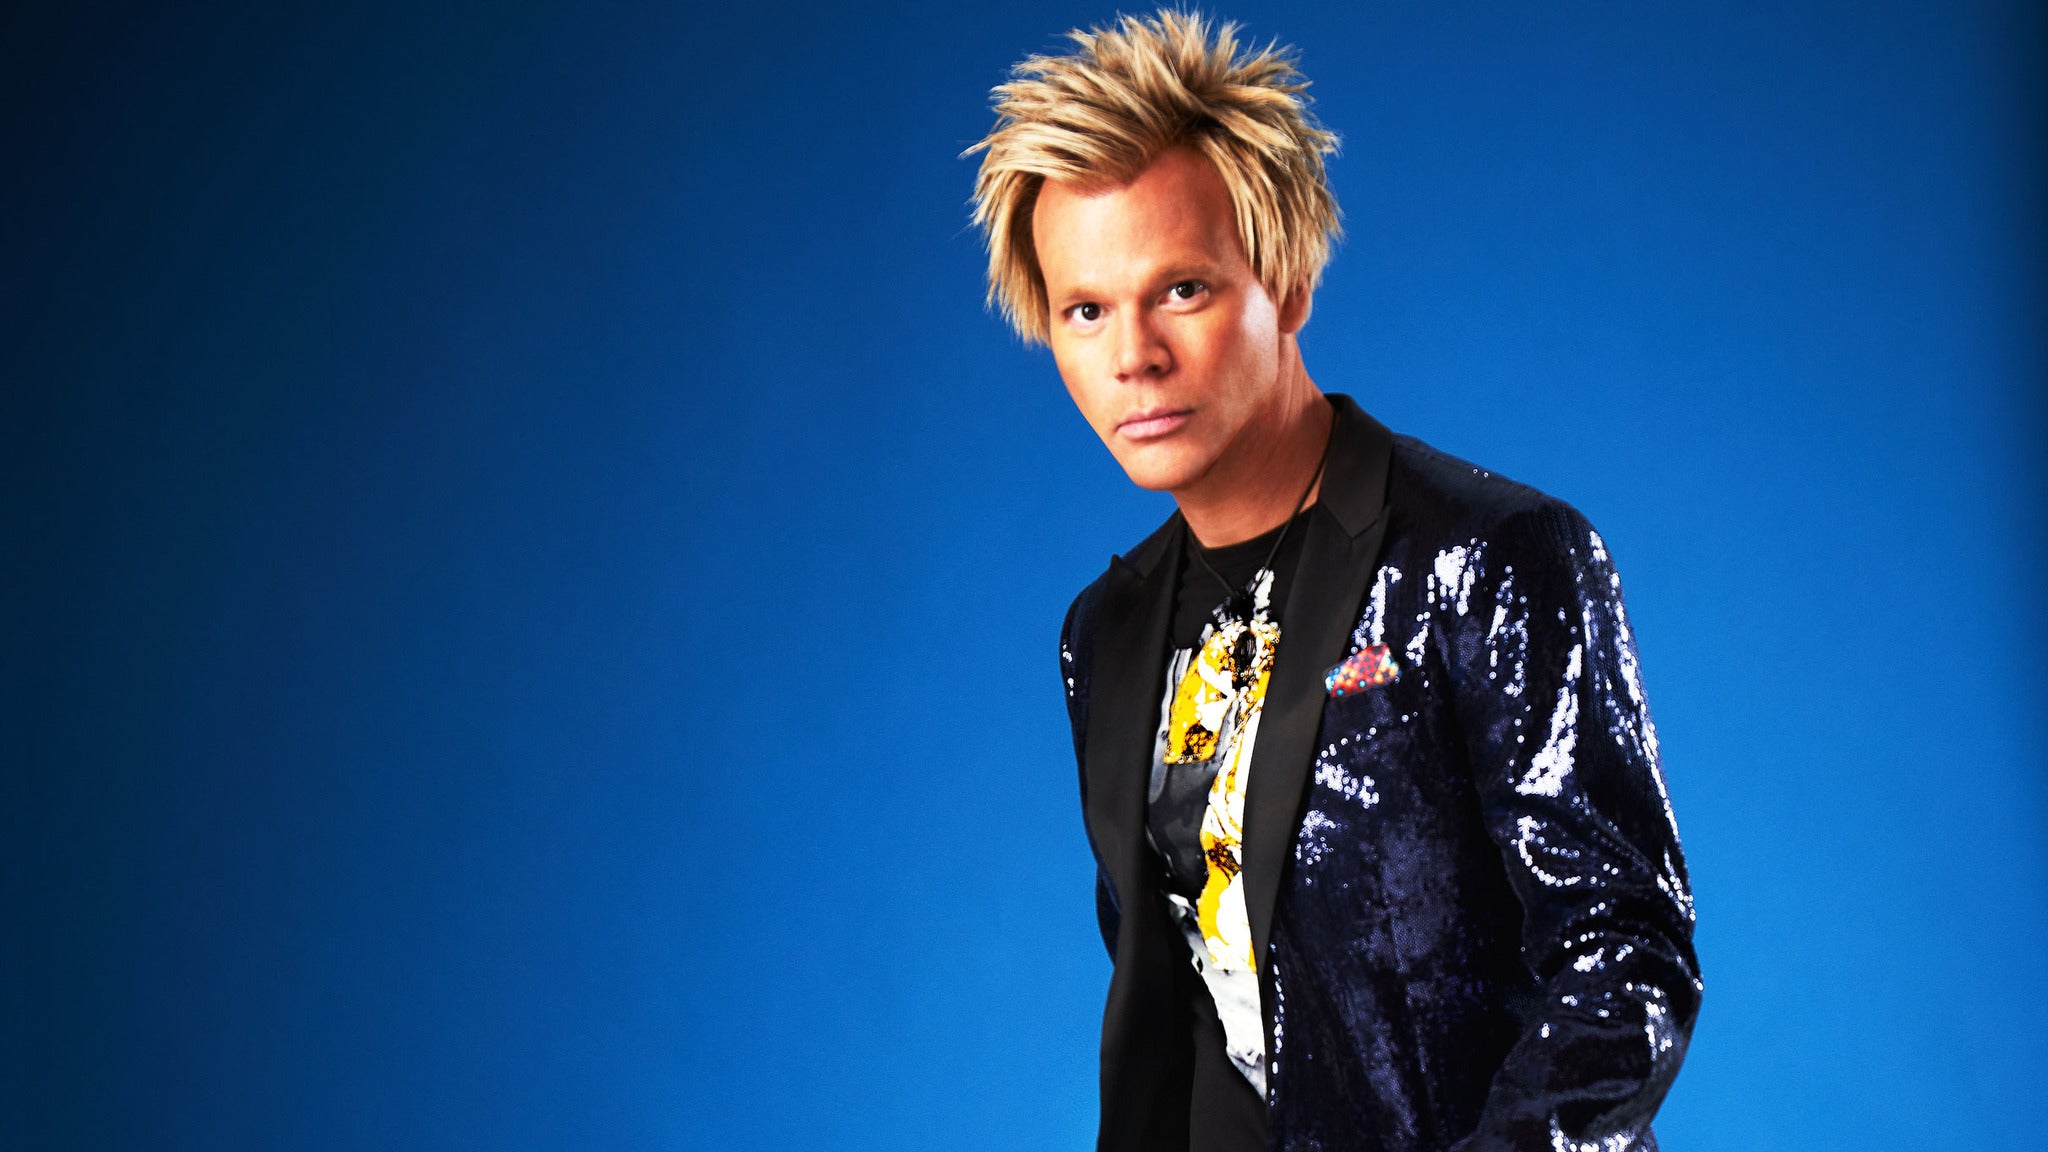 An Evening with Brian Culbertson at The Lyric Theatre